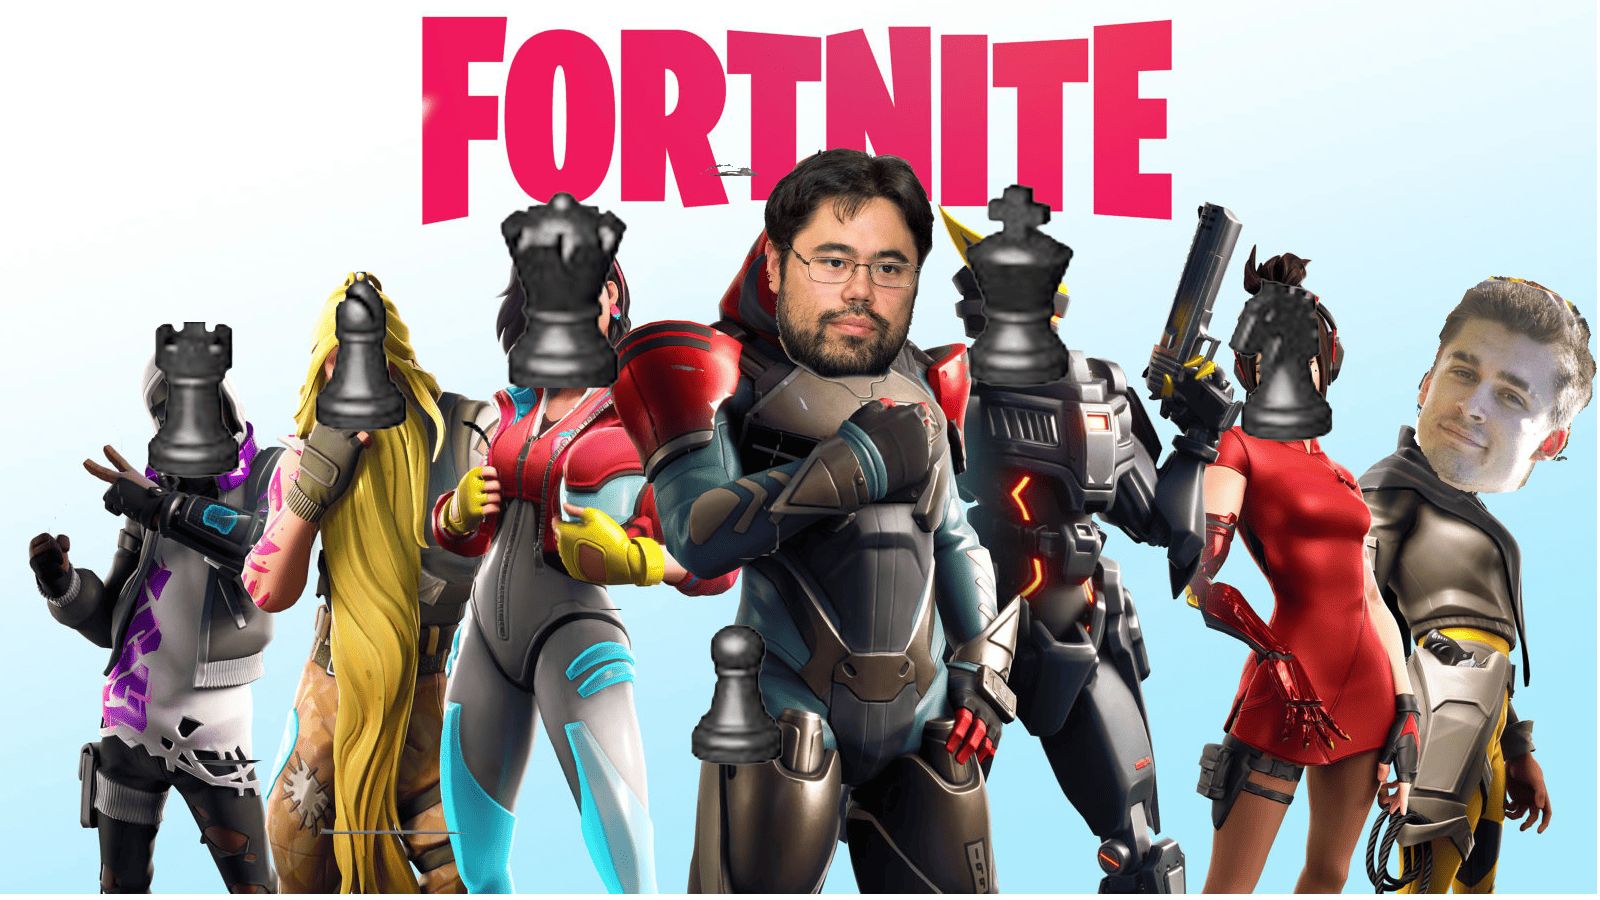 Is chess the new fortnite?